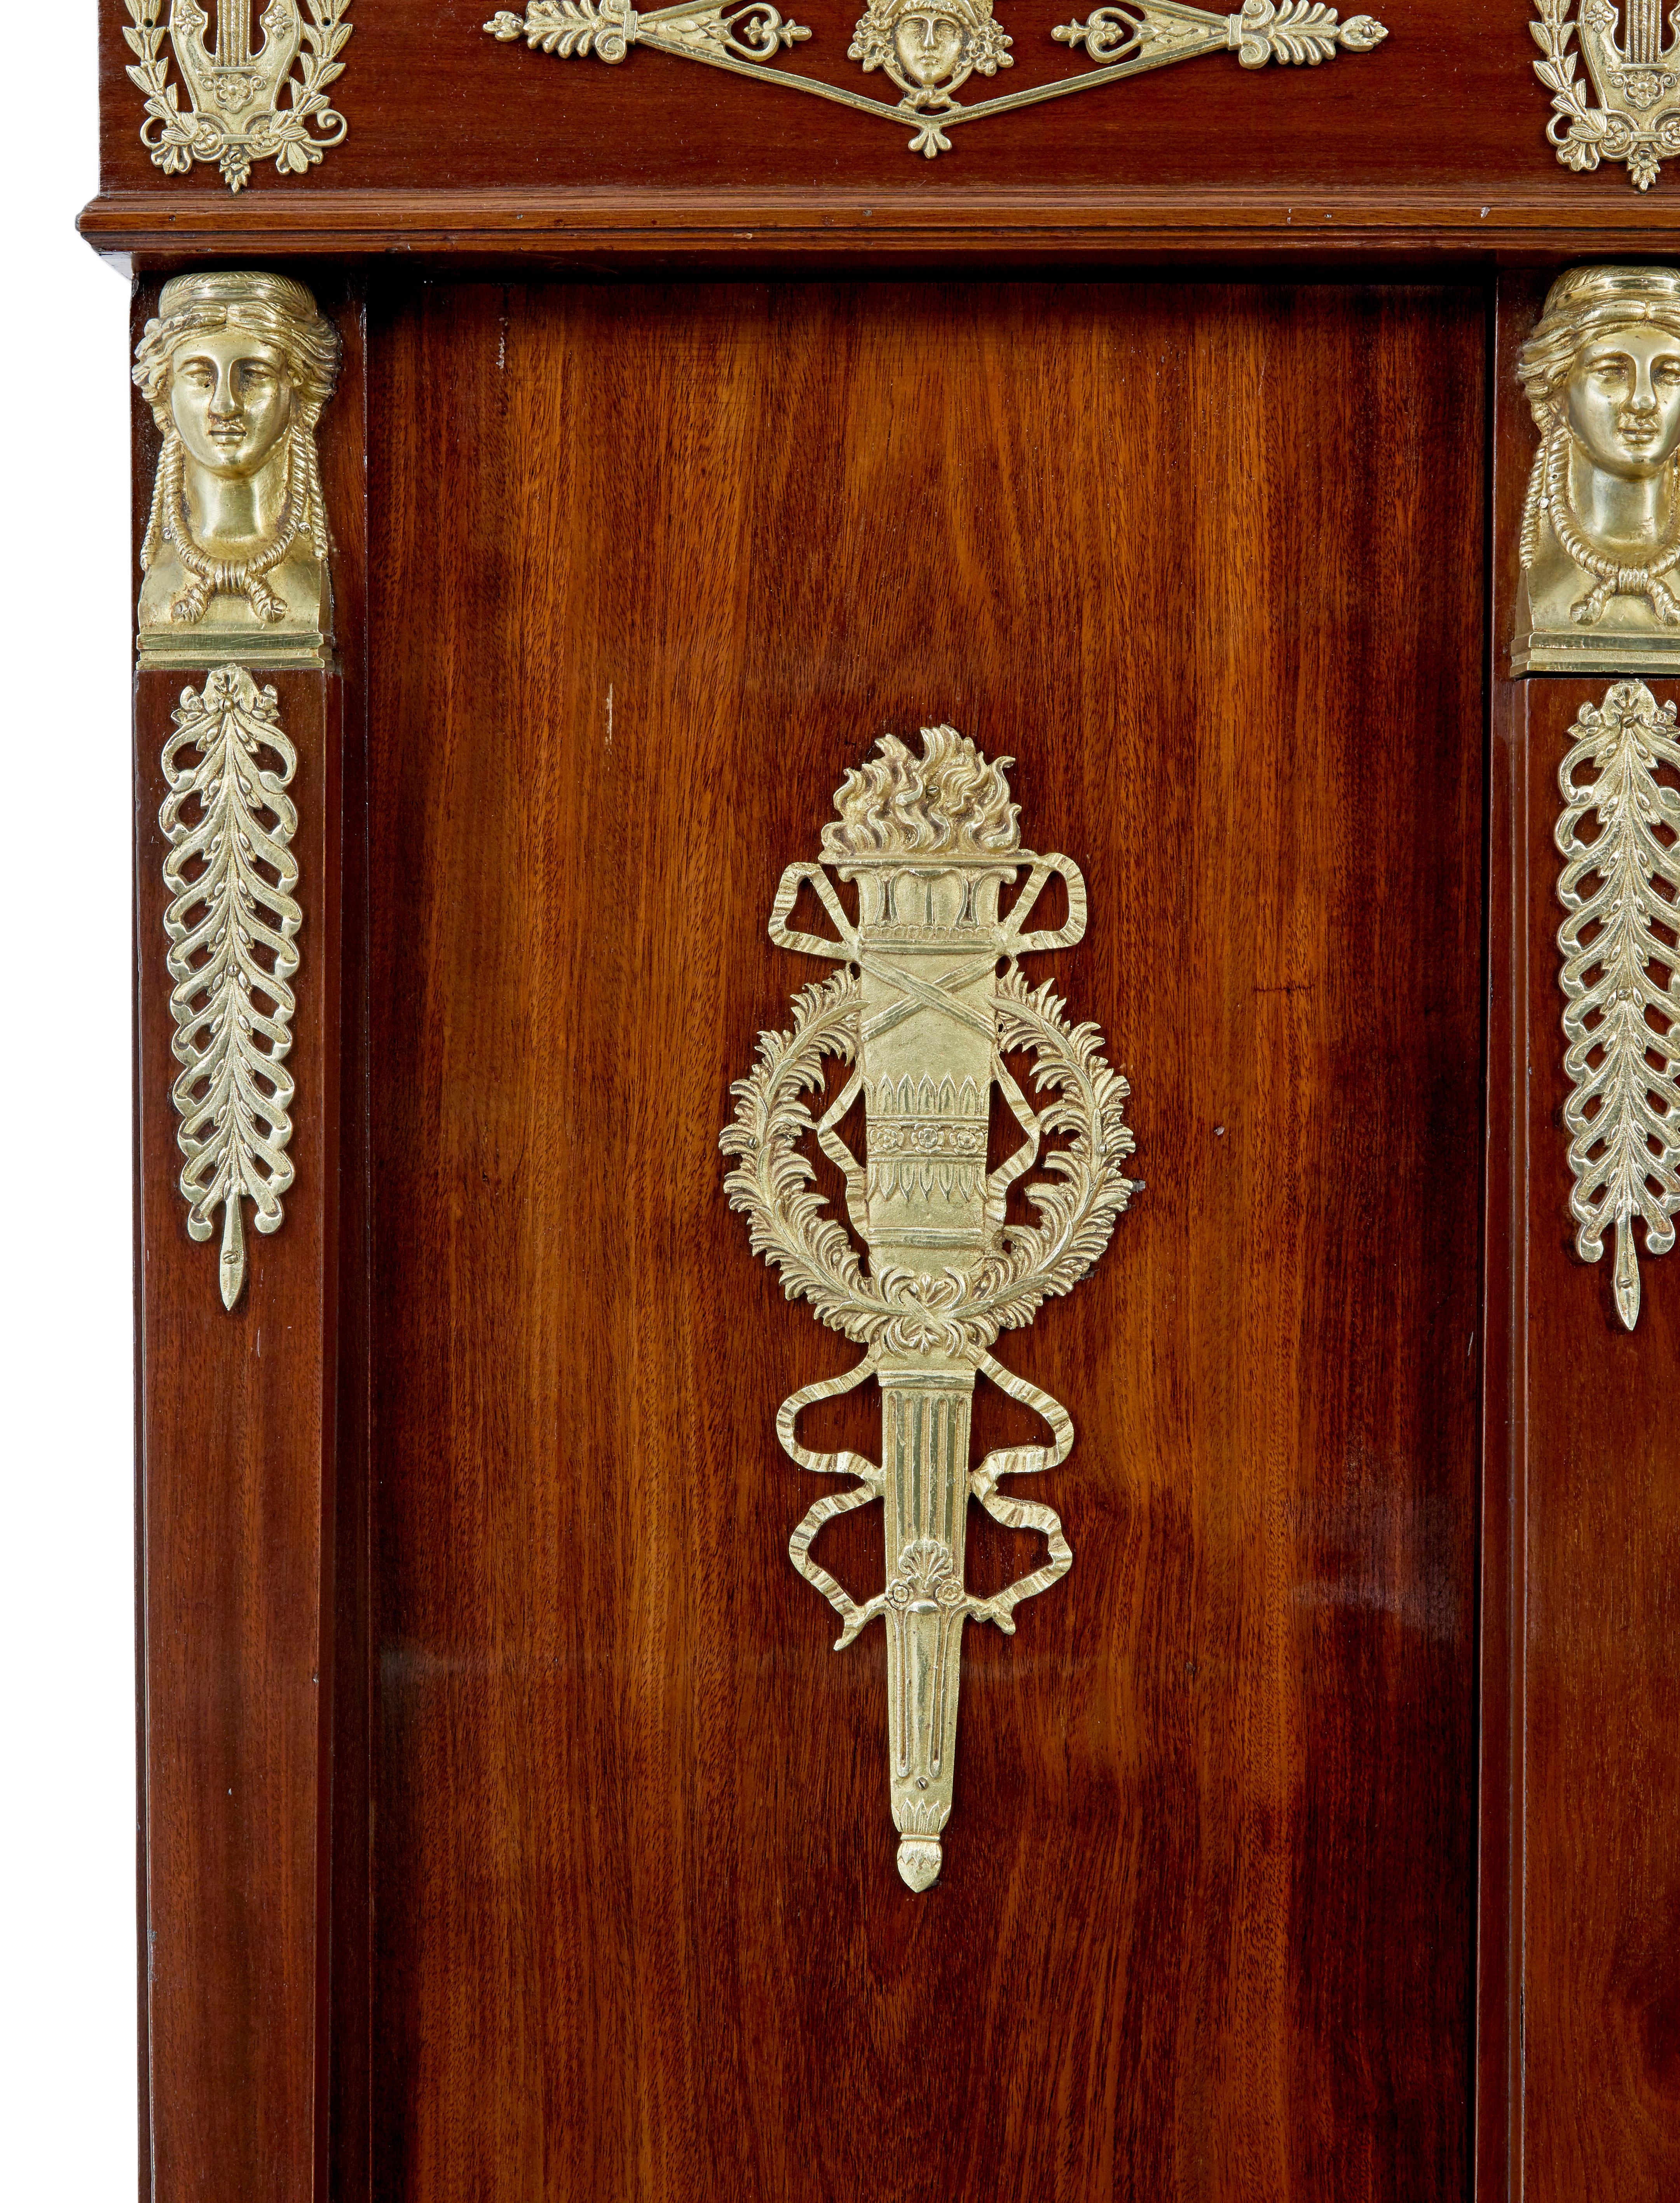 Late 19th century French empire mahogany and ormolu cabinet For Sale 1